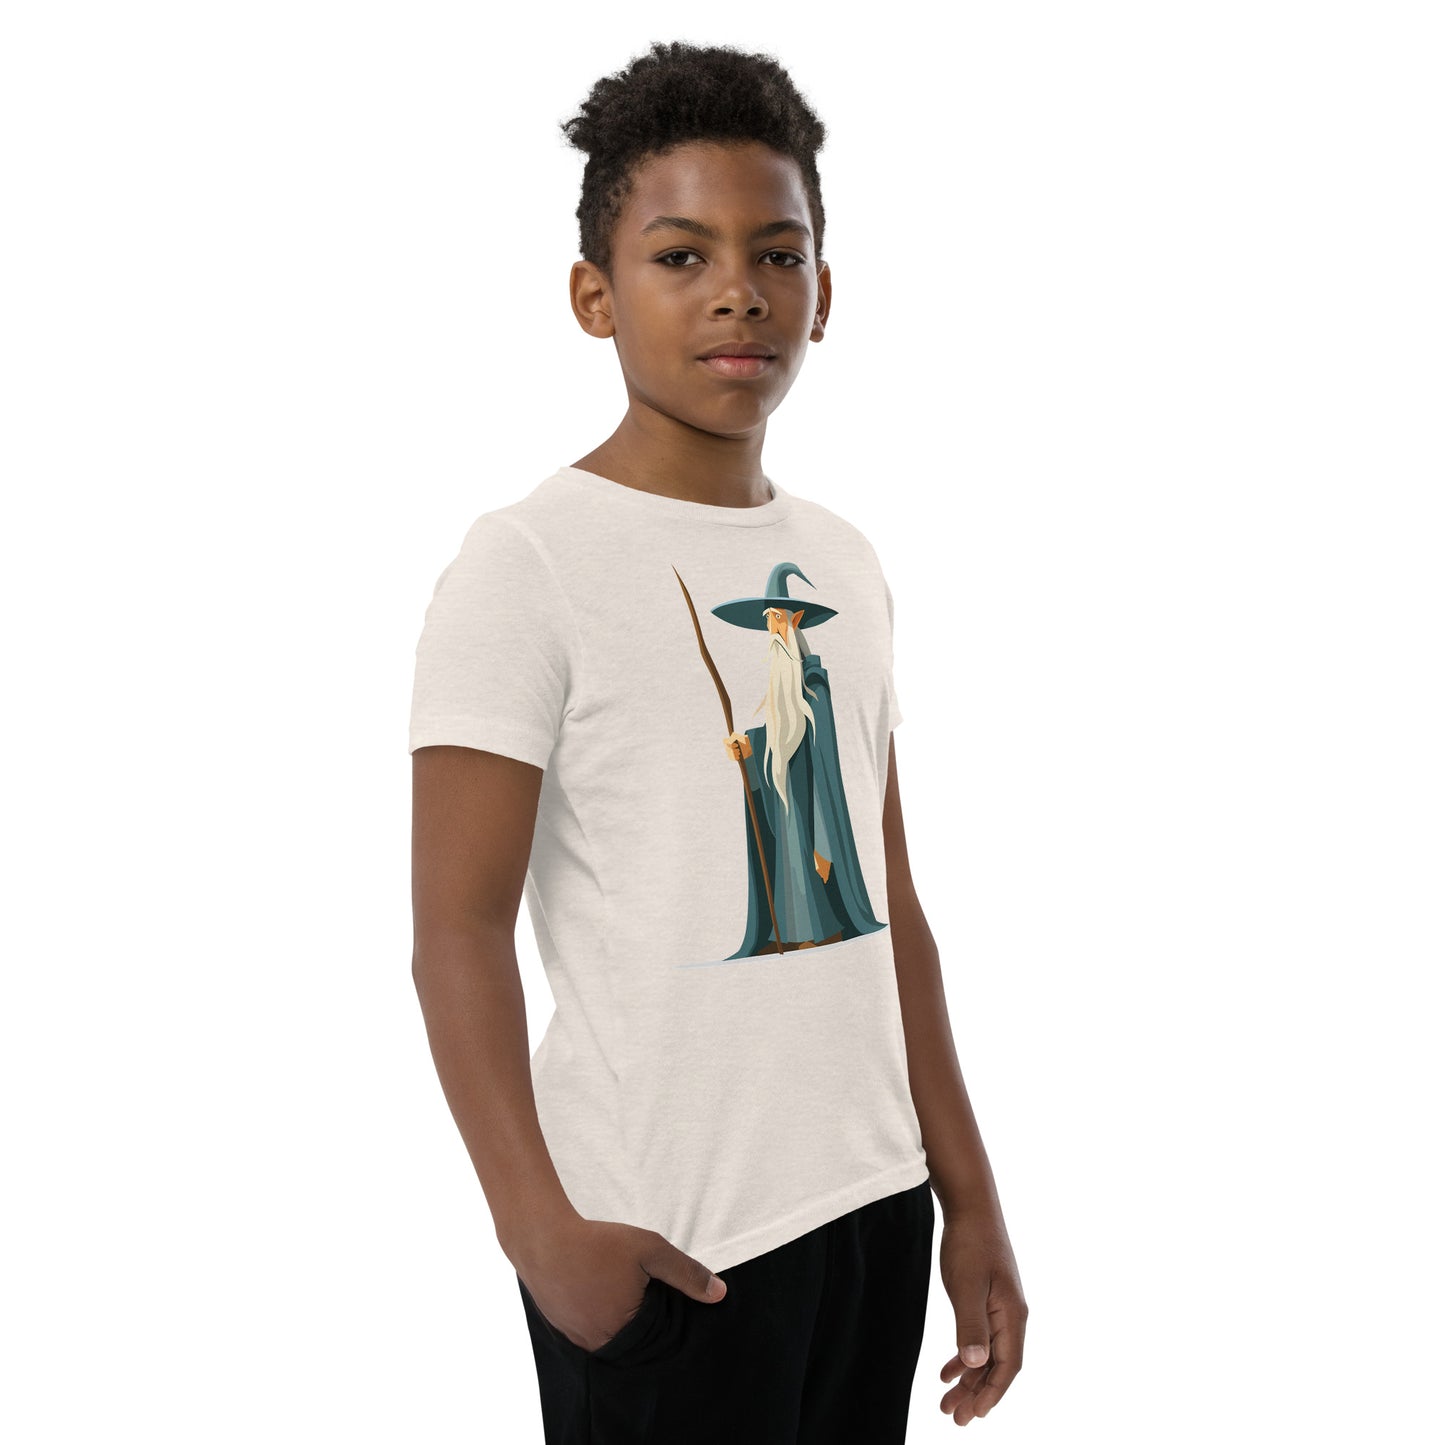 Boy with a heather dust T-shirt with a picture of a magician